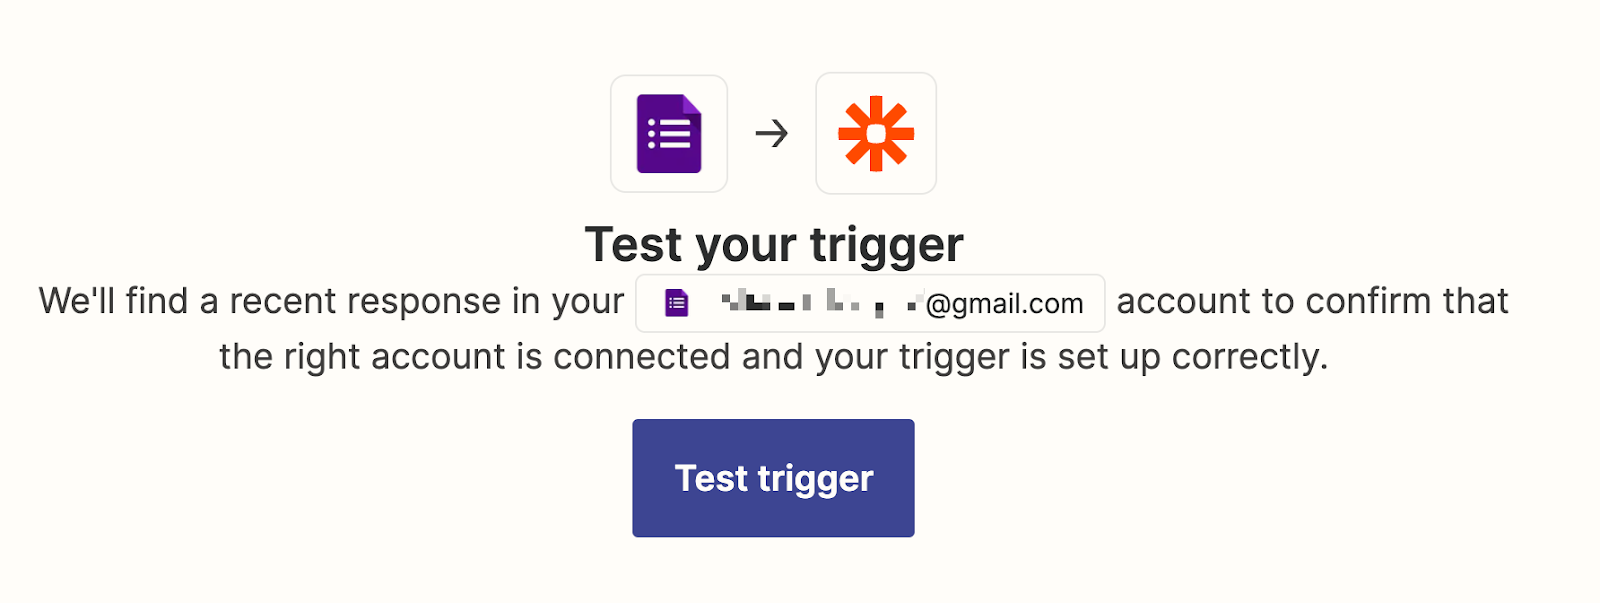 Zapier lets you test the Zap by pressing the "Test trigger" button.